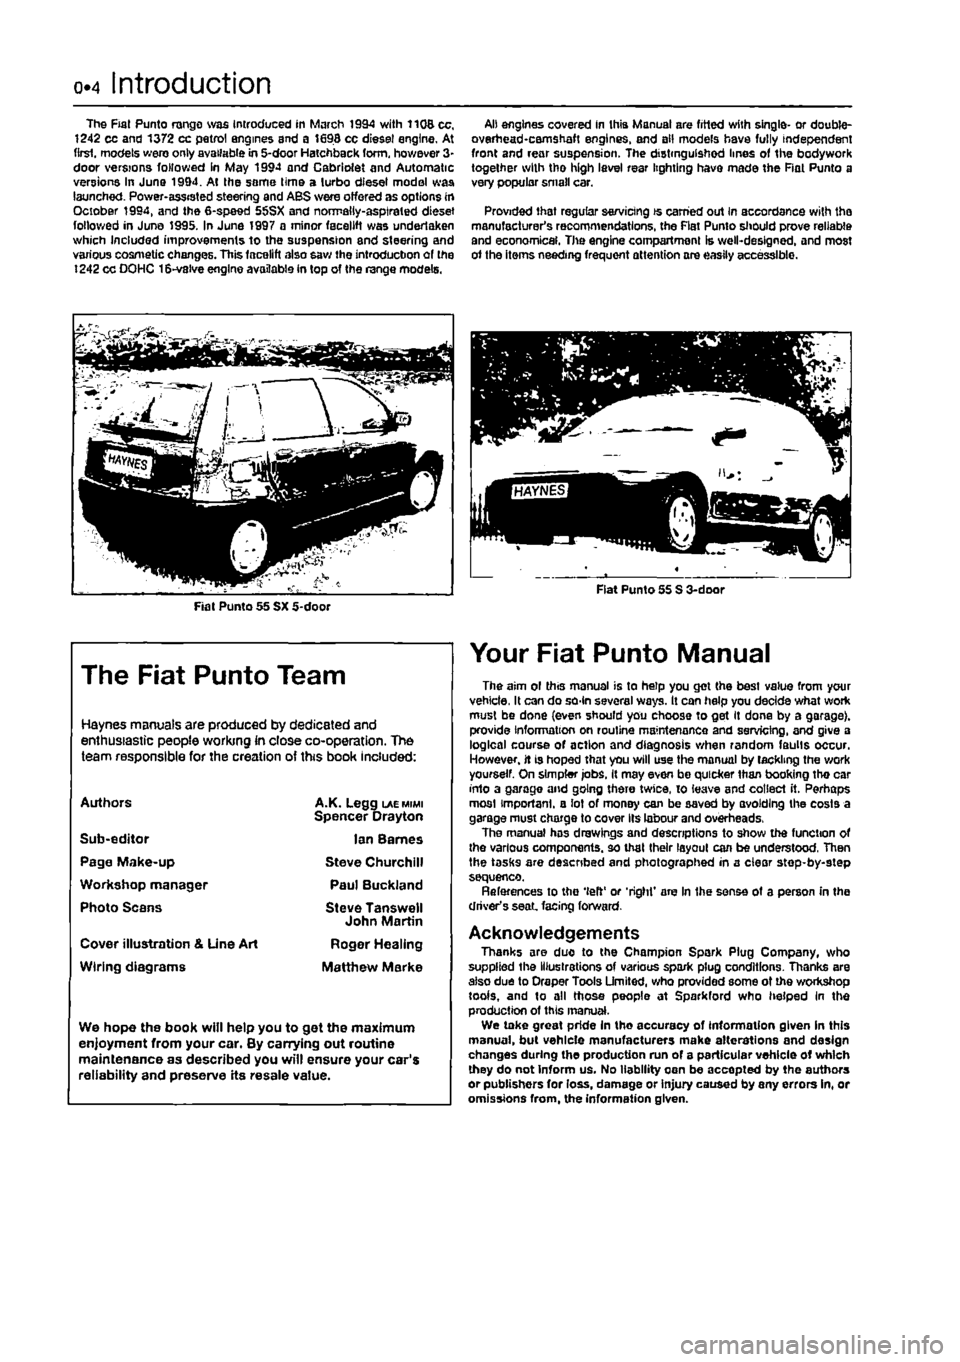 FIAT PUNTO 1995 176 / 1.G Workshop Manual 
0.4 Introduction 
The Fiat Punto range was Introduced in March 1994 with 1106 cc, 1242 cc and 1372 cc petrol engines and a 1698 cc diesel engine. At first, models wero only available in 5-door Hatchb